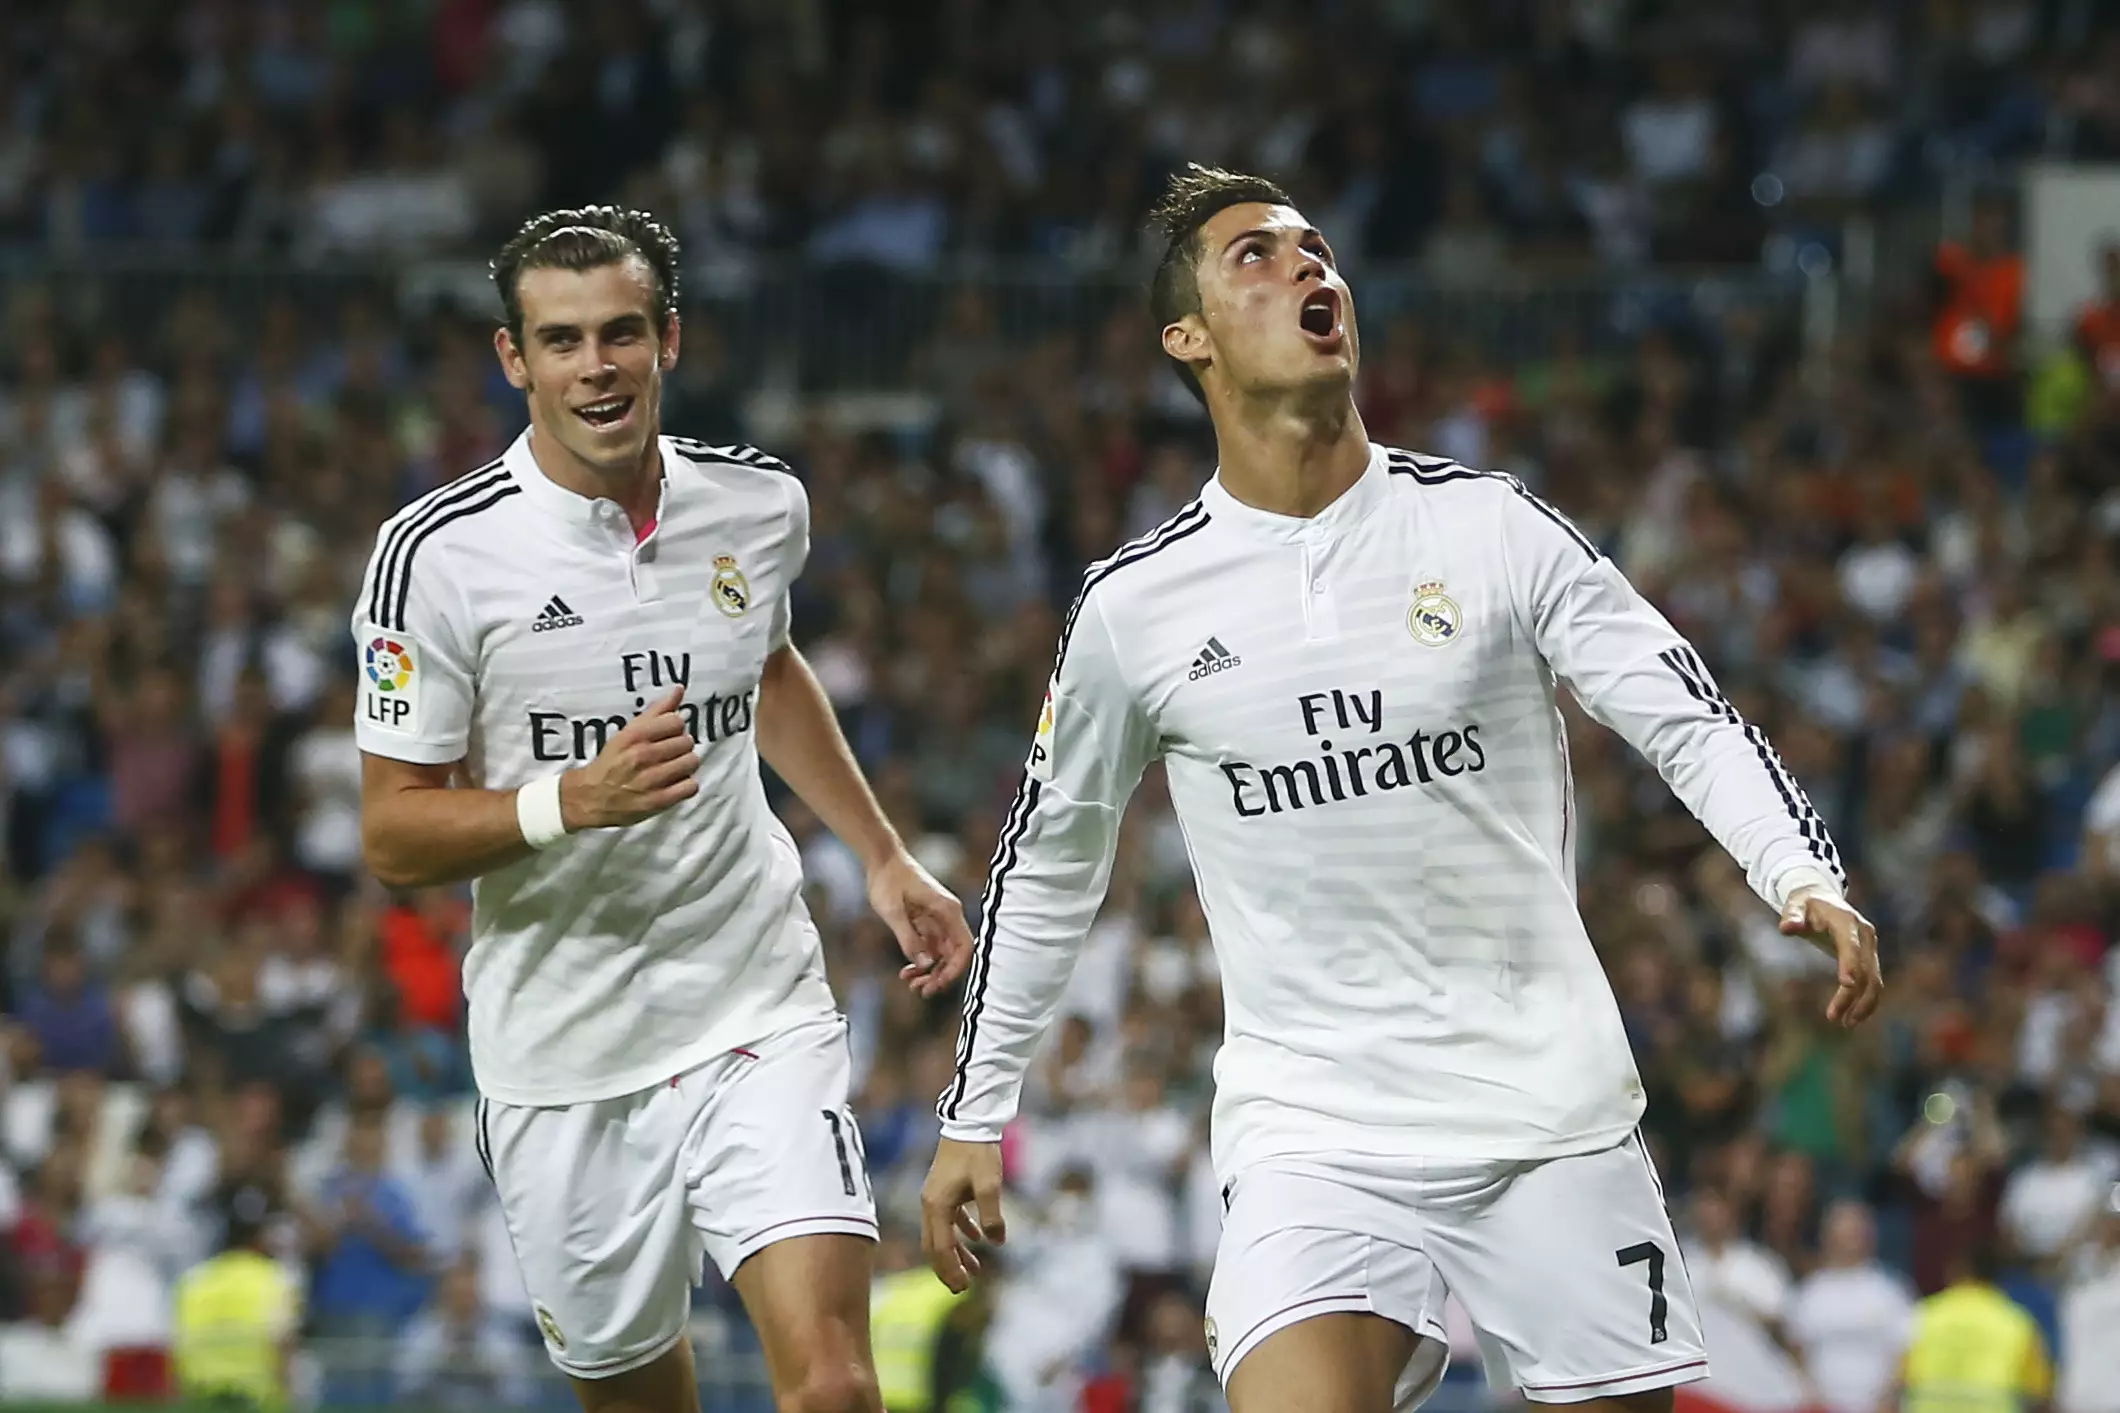 Gareth Bale Claims There's A Faster Real Madrid Player Than Ronaldo